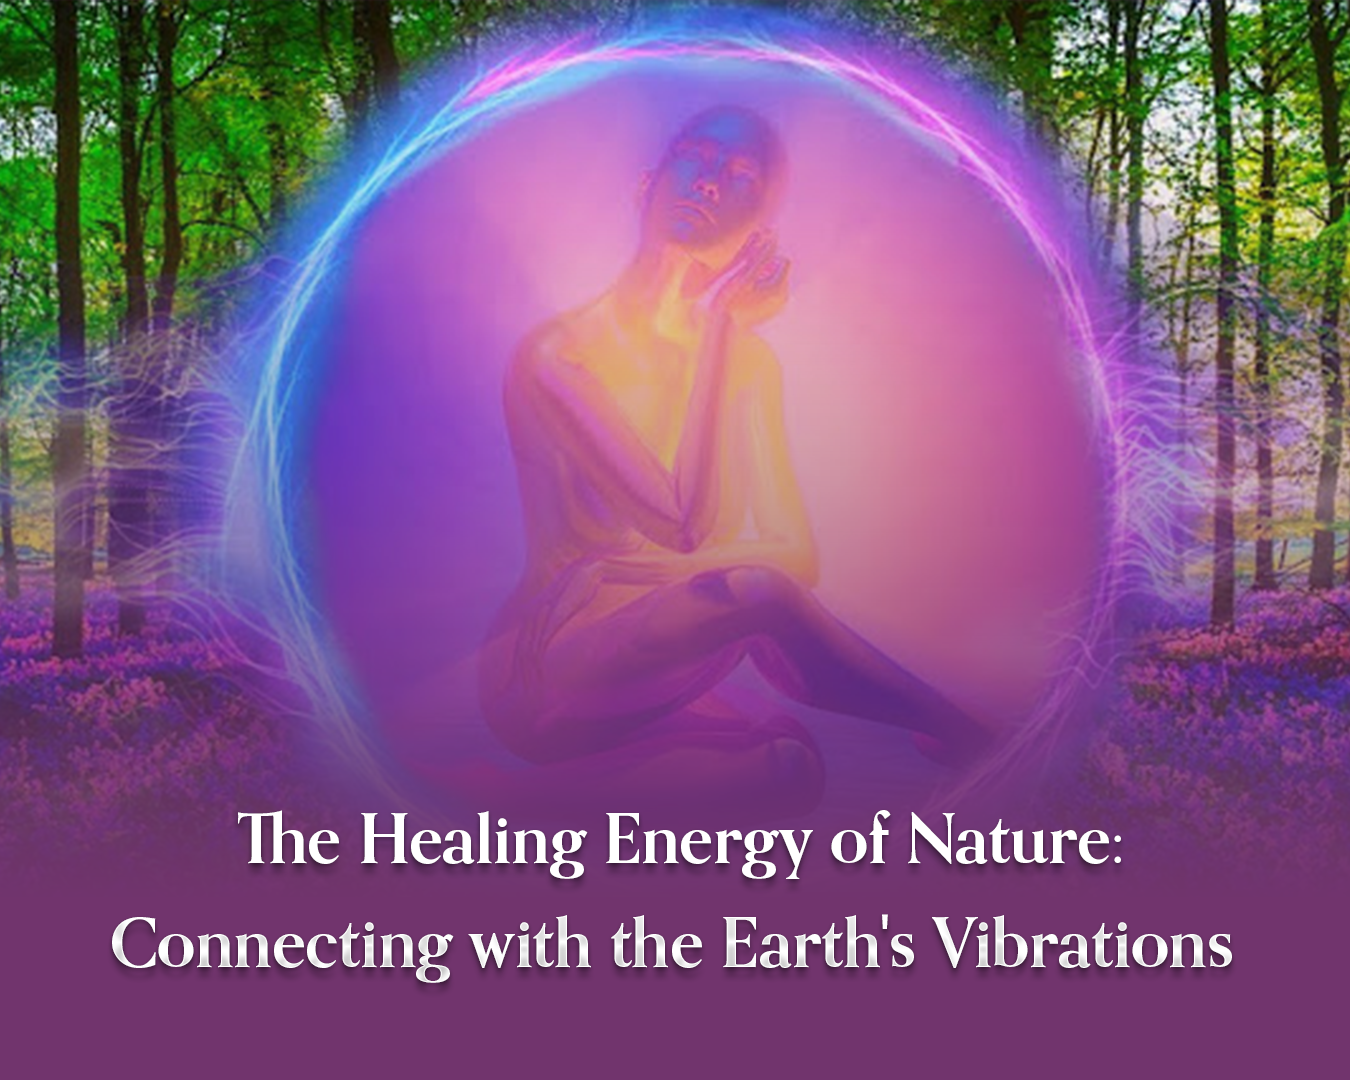 The Healing Energy of Nature: Connecting with the Earth's Vibrations